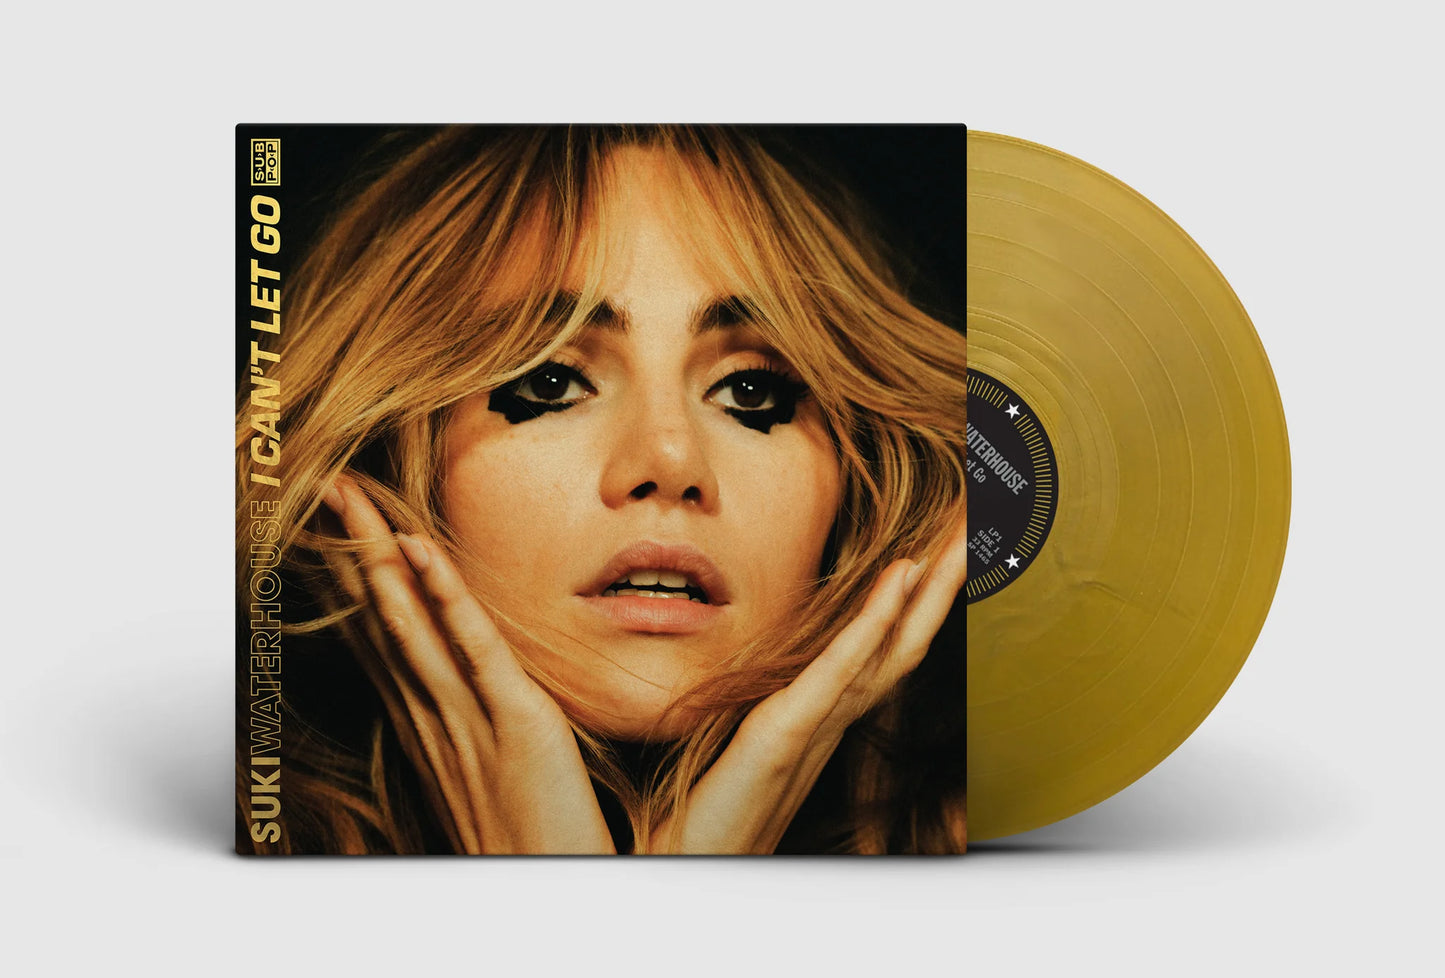 Suki Waterhouse - I Can't Let Go (Loser Edition/Limited Edition on First Pressing